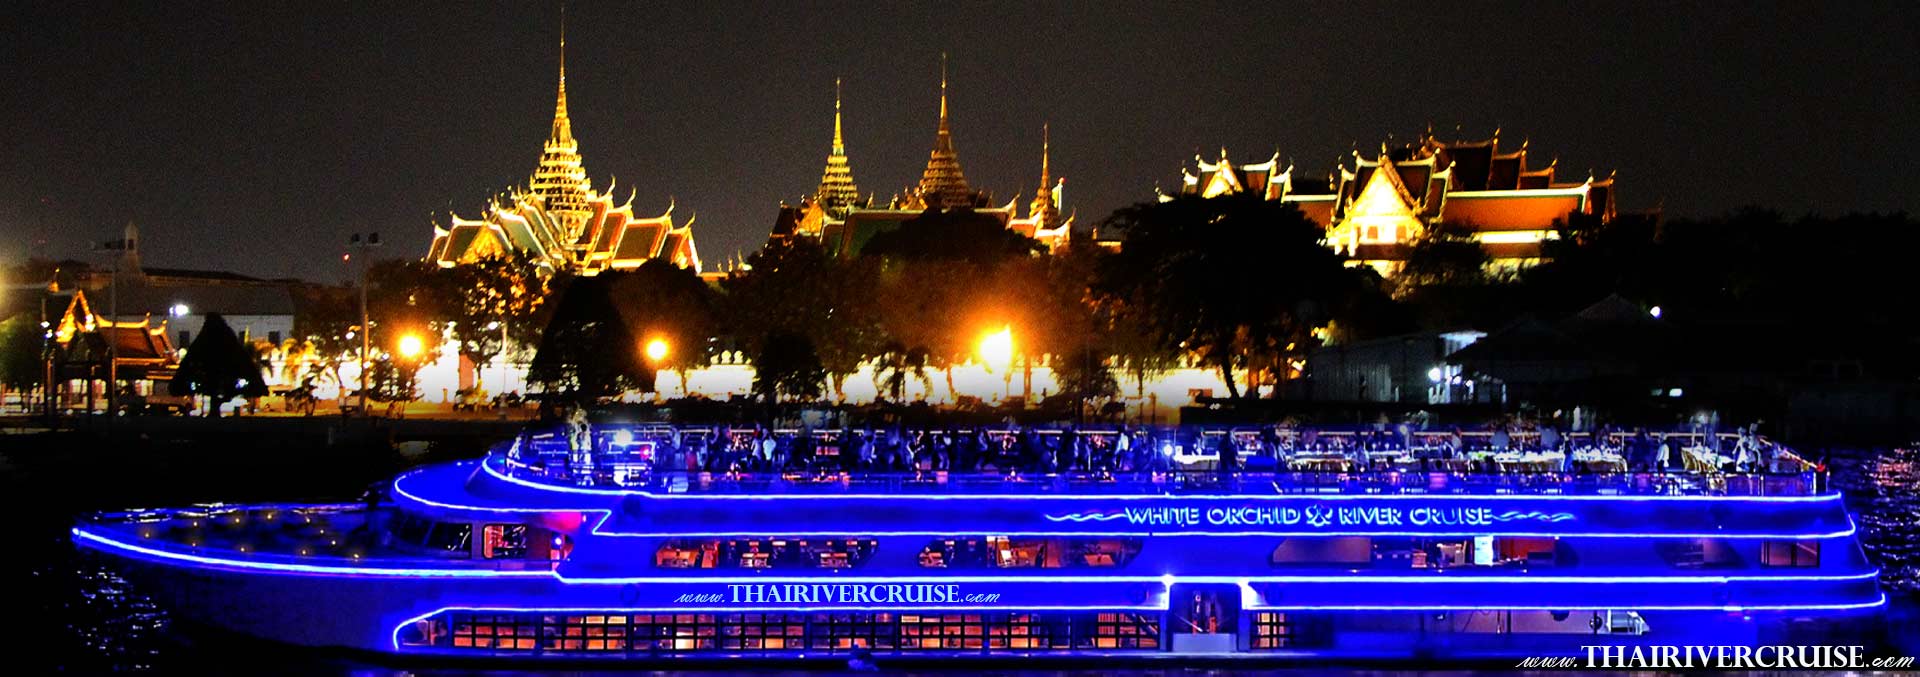 White Orchid River Cruise Bangkok Dinner Cruise Cheap Price Tickets Offer Now